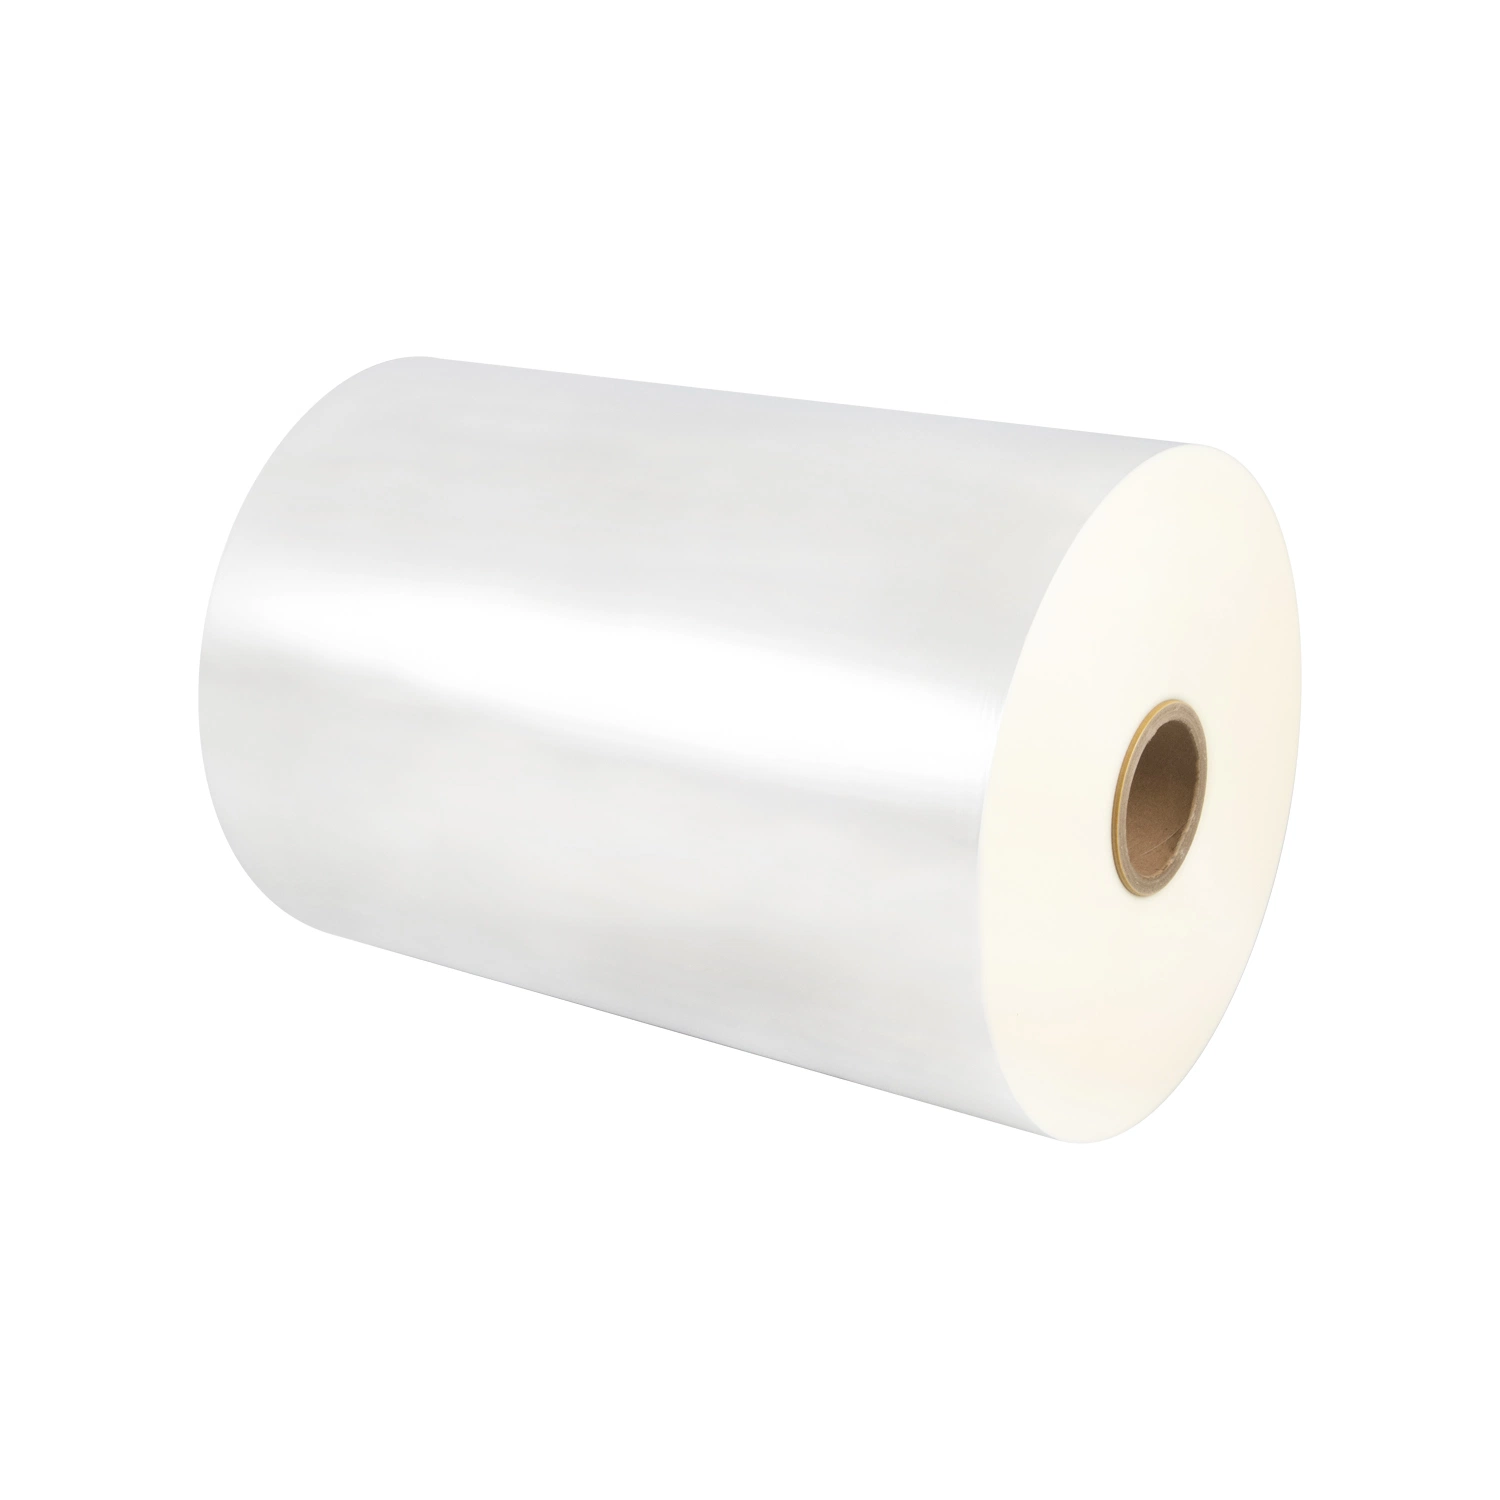 Packaging Material of Nylon Film for Printing and Packaging